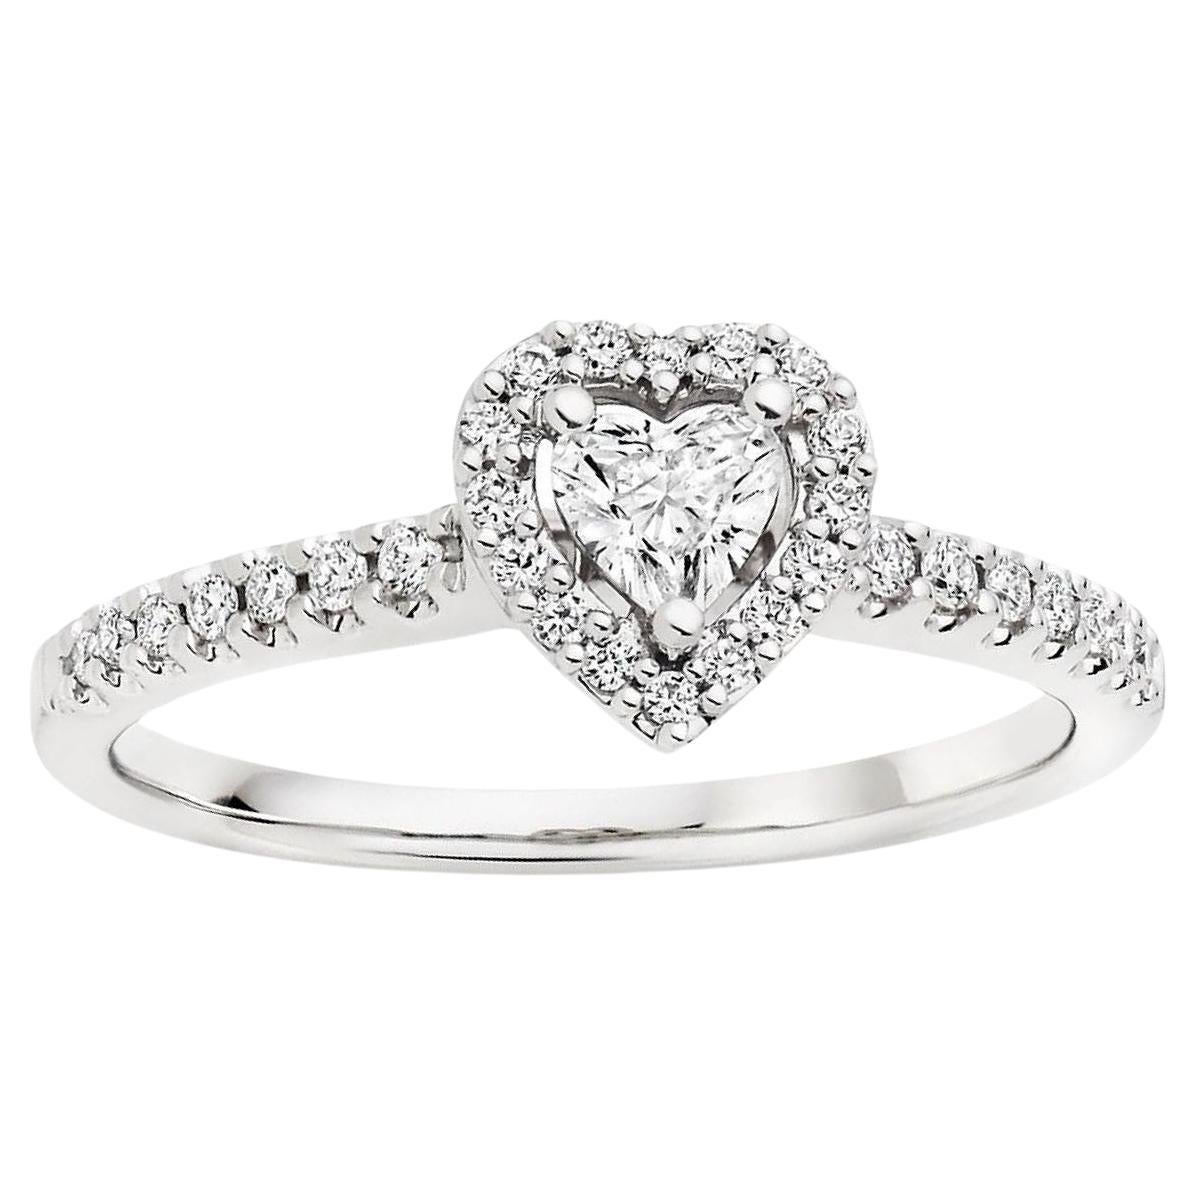 18K White Gold Double Heart Diamond Engagement Ring (Made to Order)